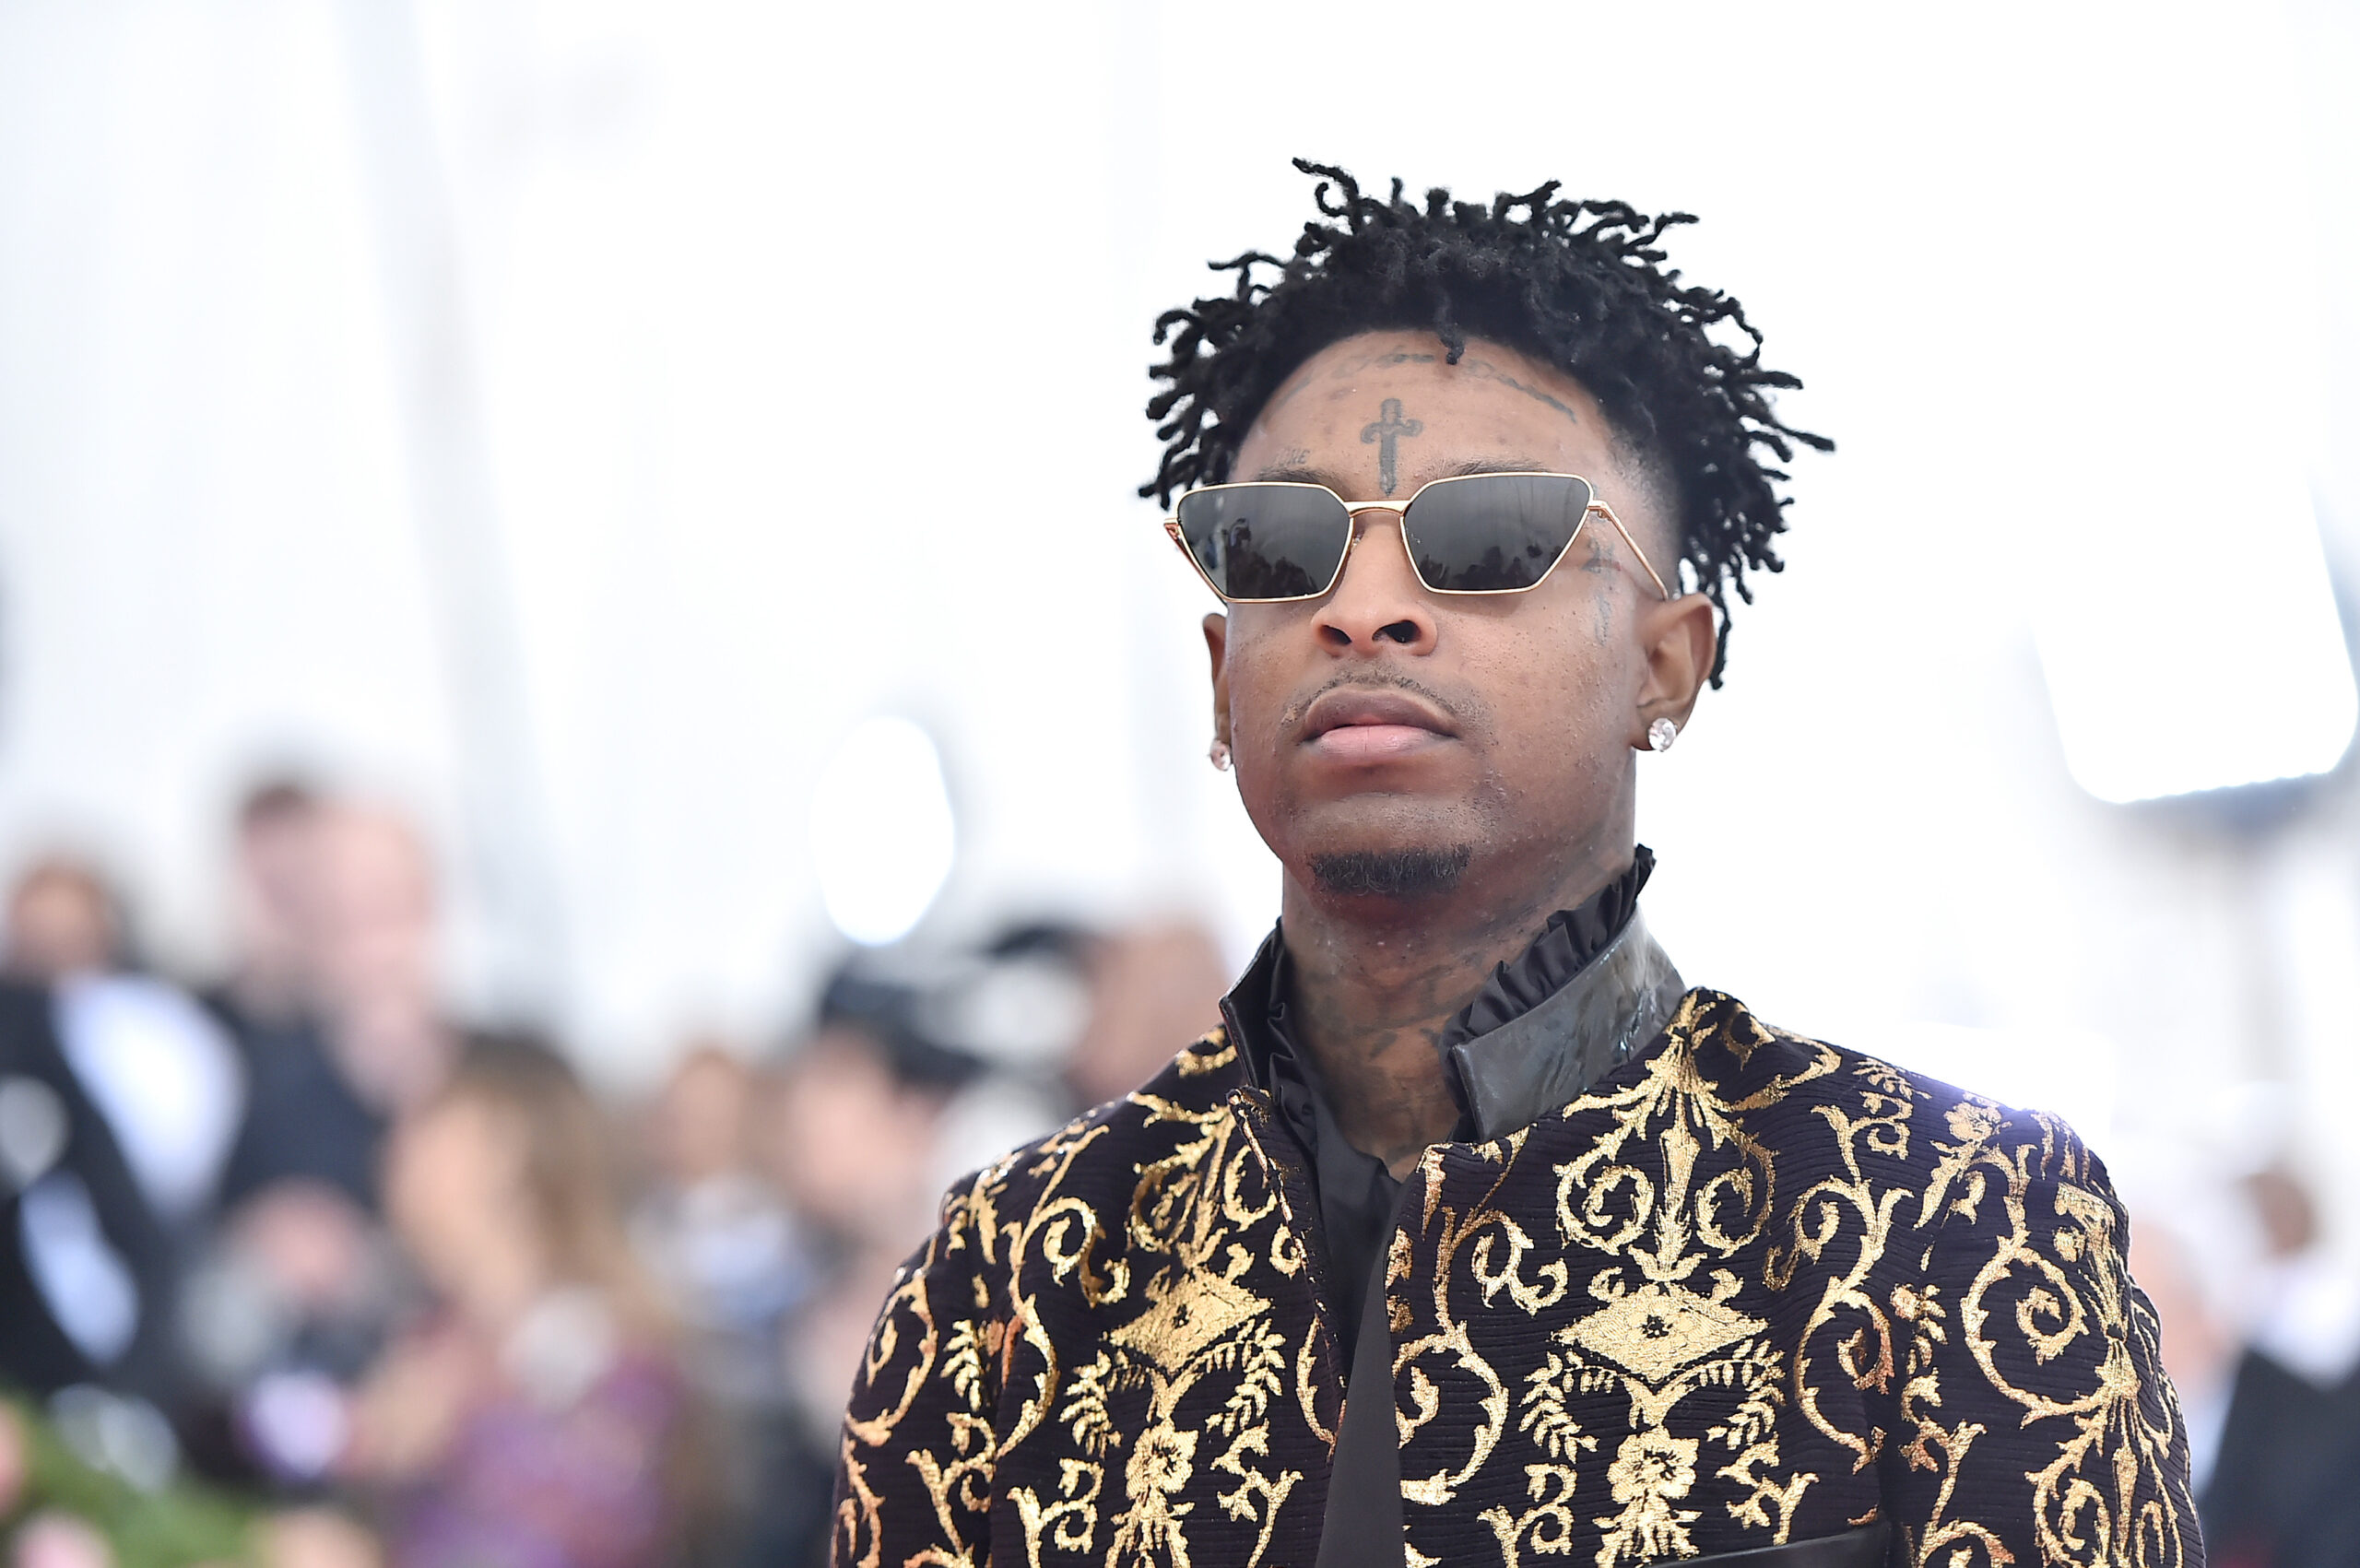 21 Savage Announces First-Ever U.K. Concert at London's O2 Arena